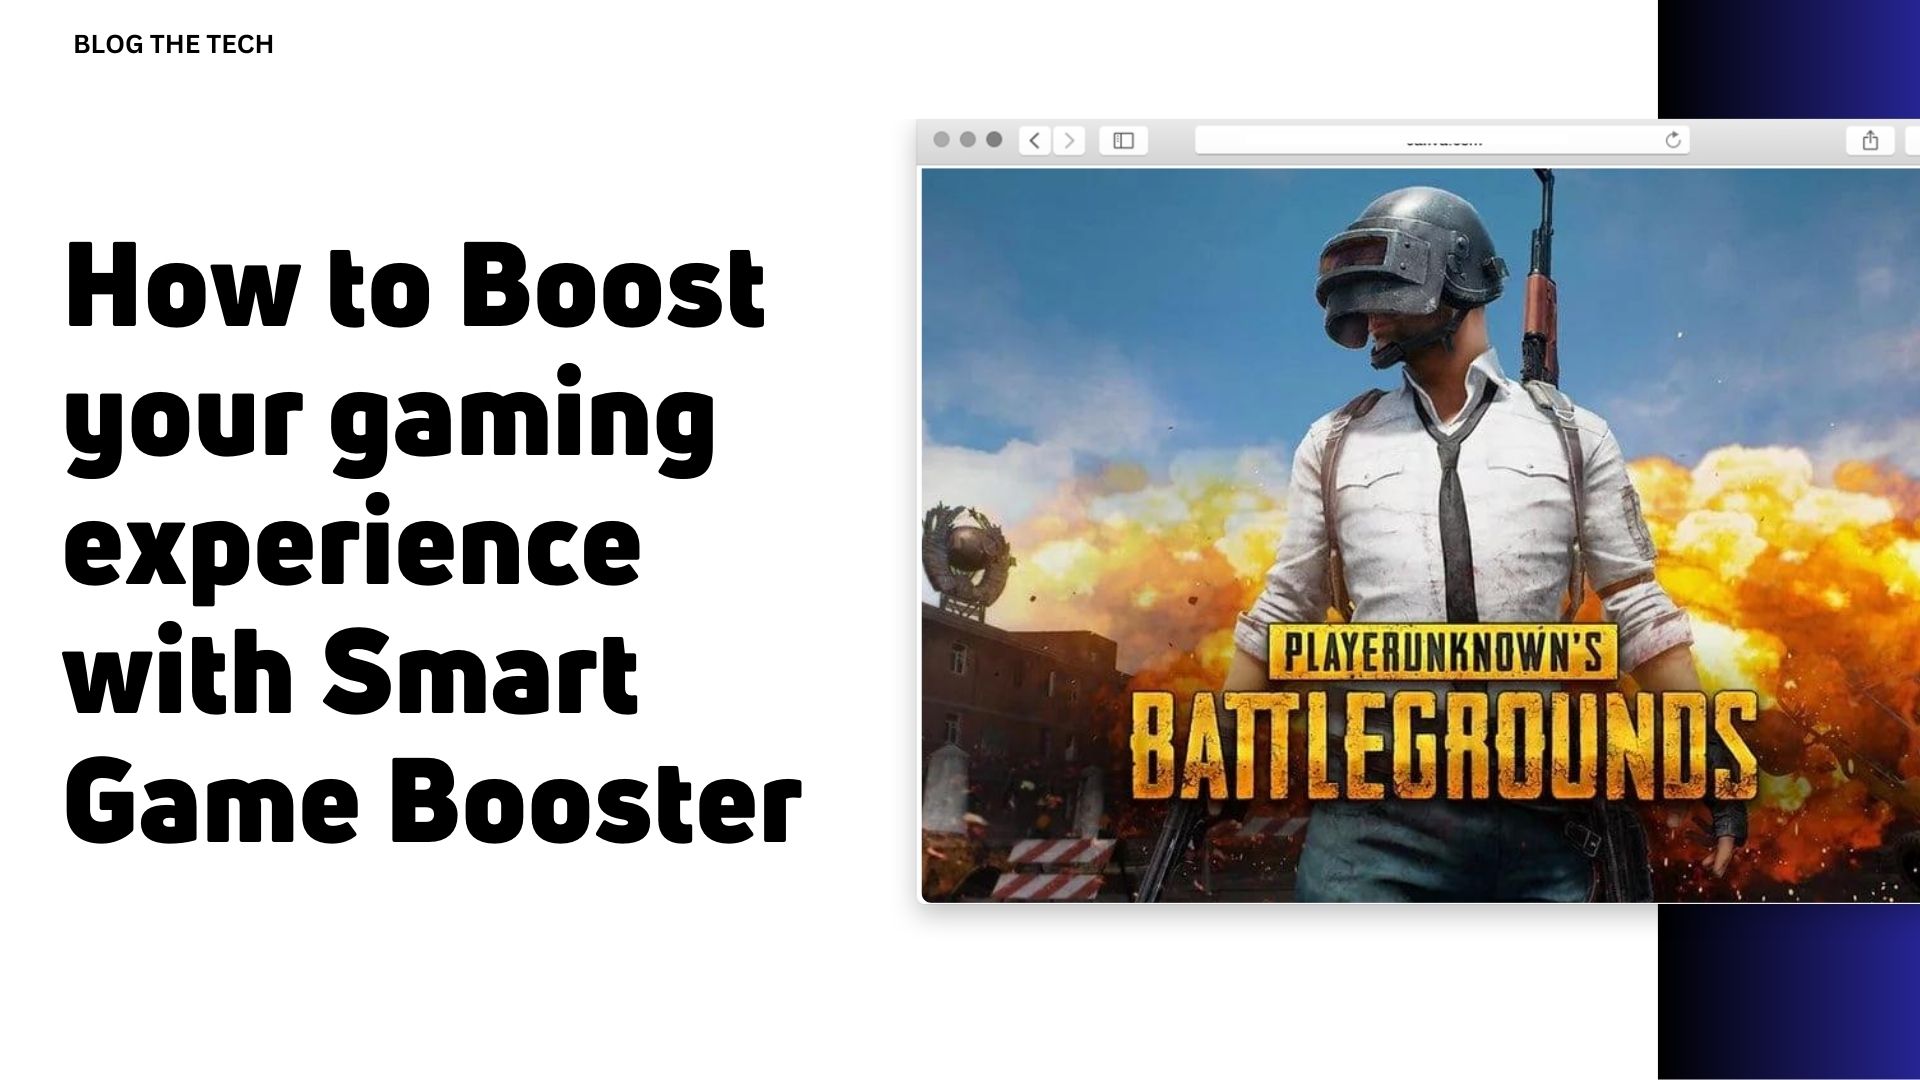 How-to-Boost-your-gaming-experience-with-Smart-Game-Booster-Featured